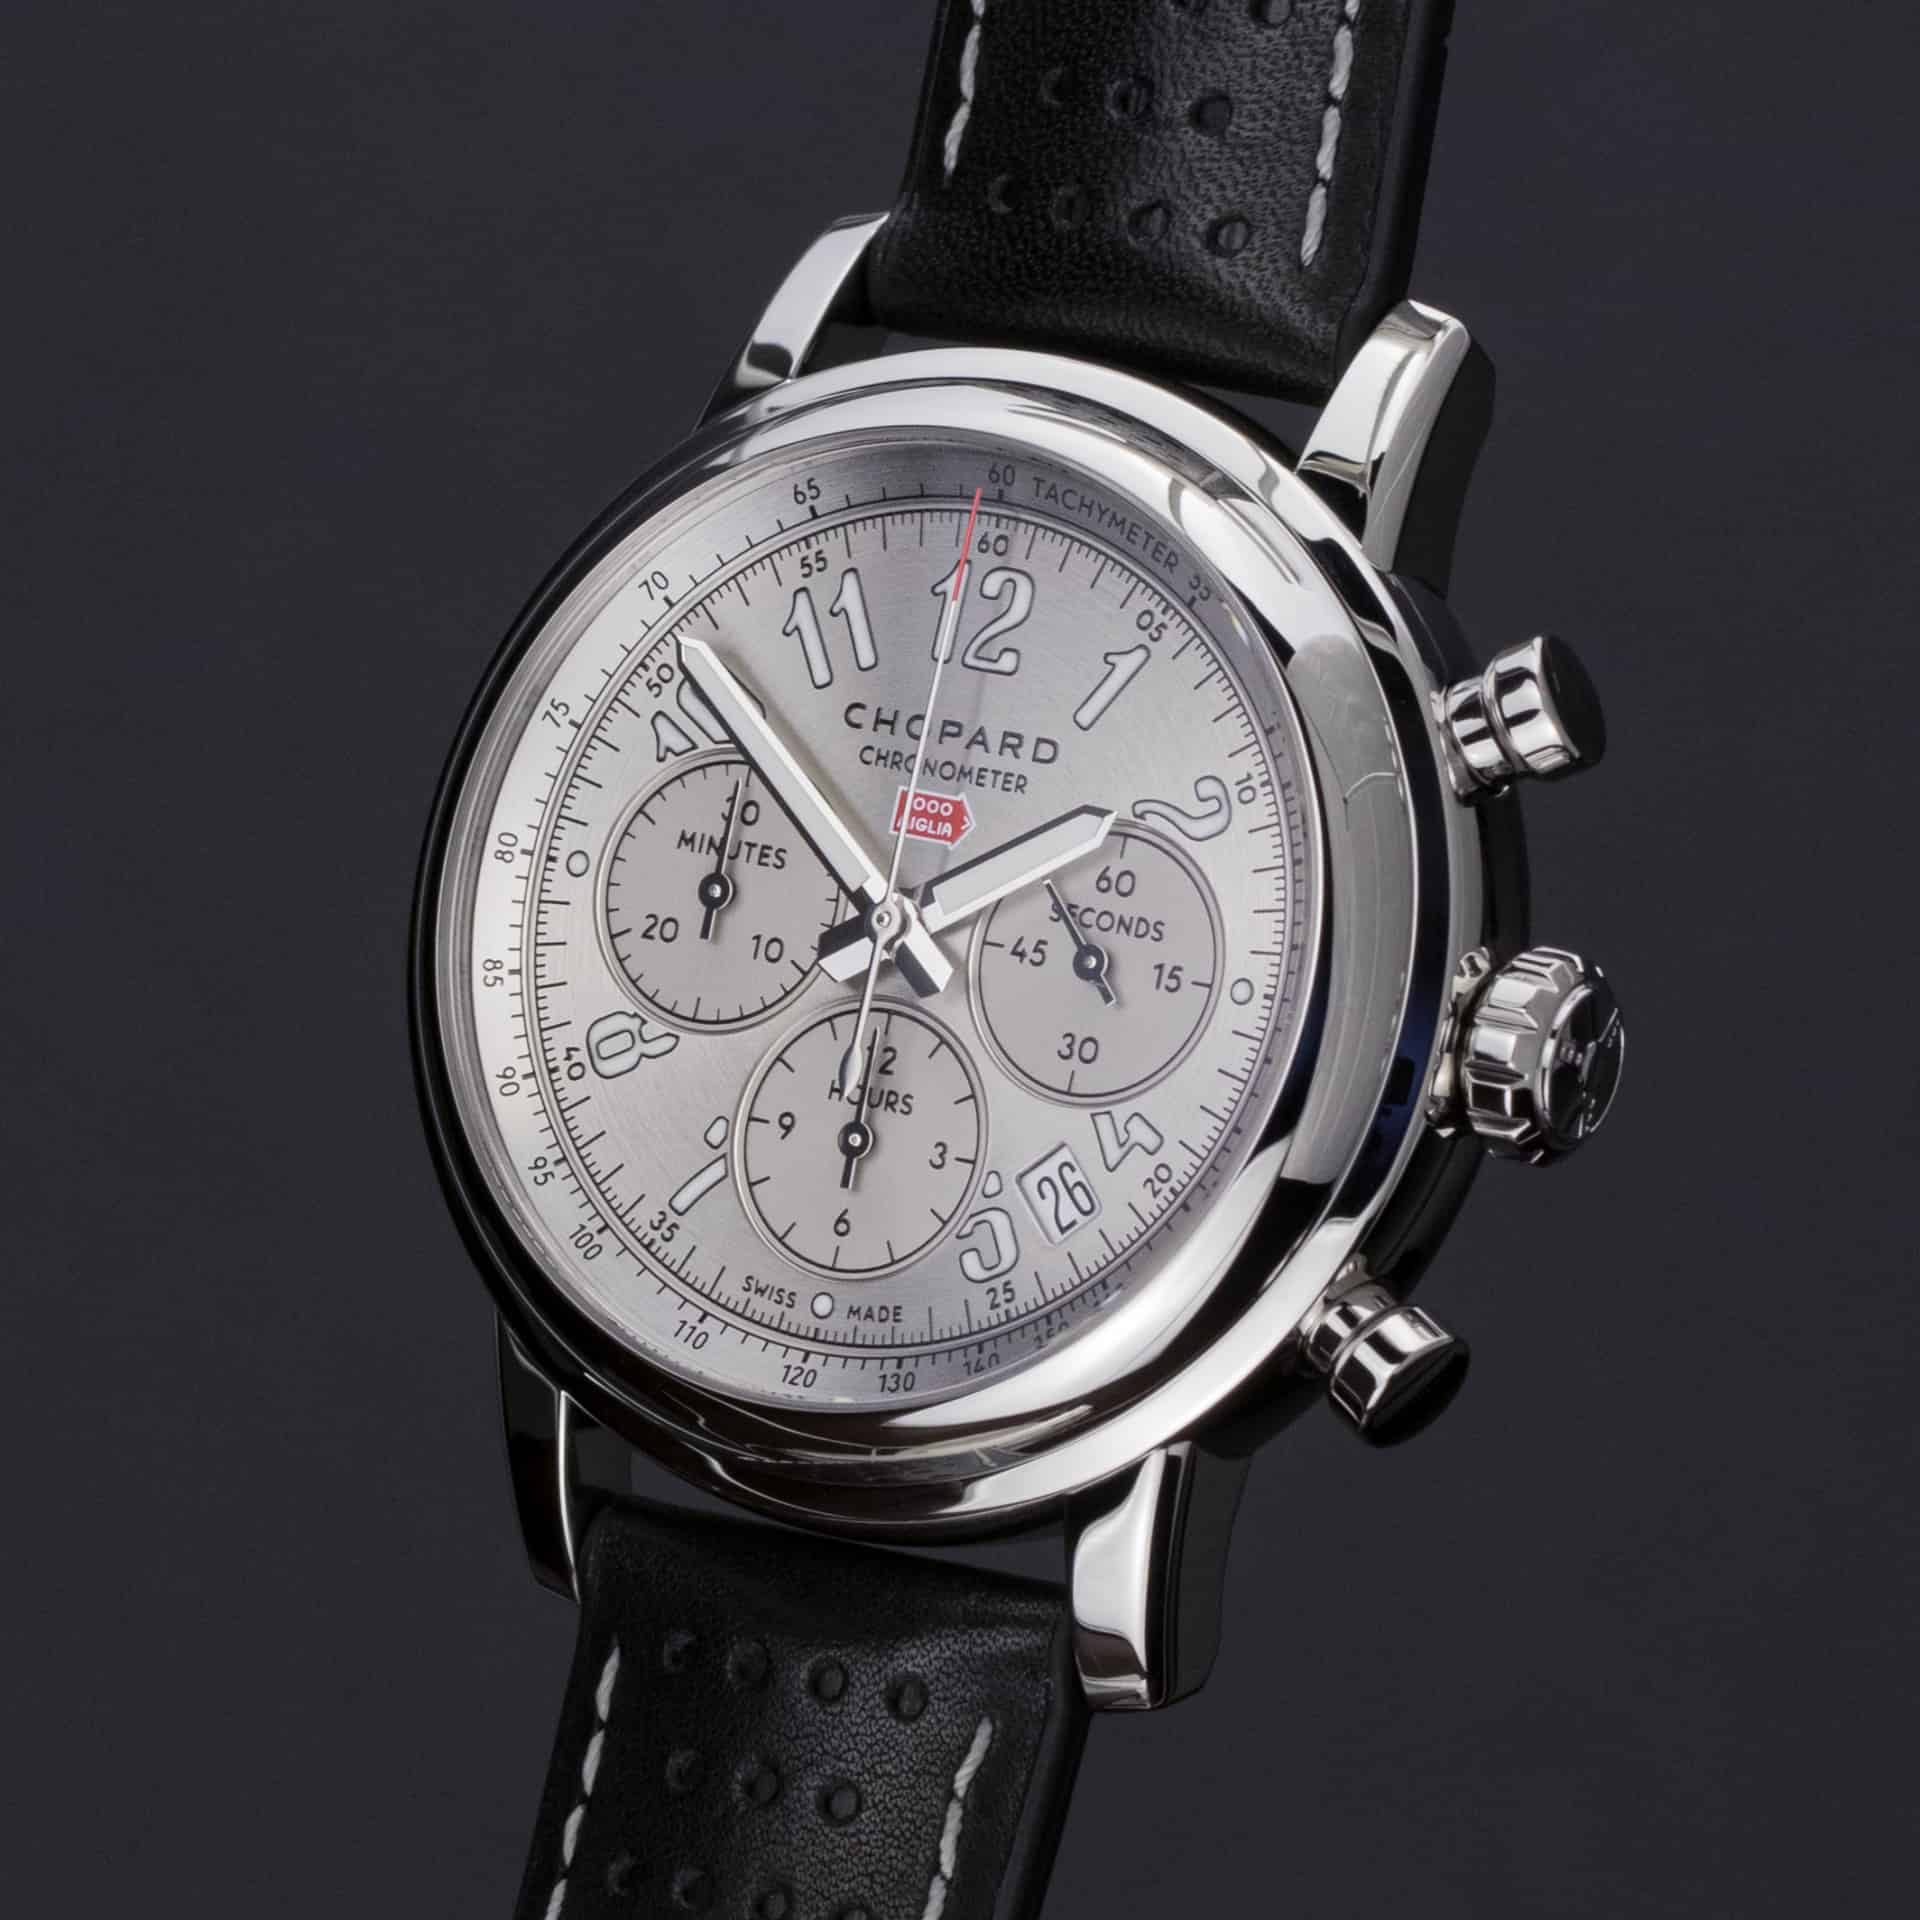 Chopard Mille Miglia for $4,399 for sale from a Private Seller on